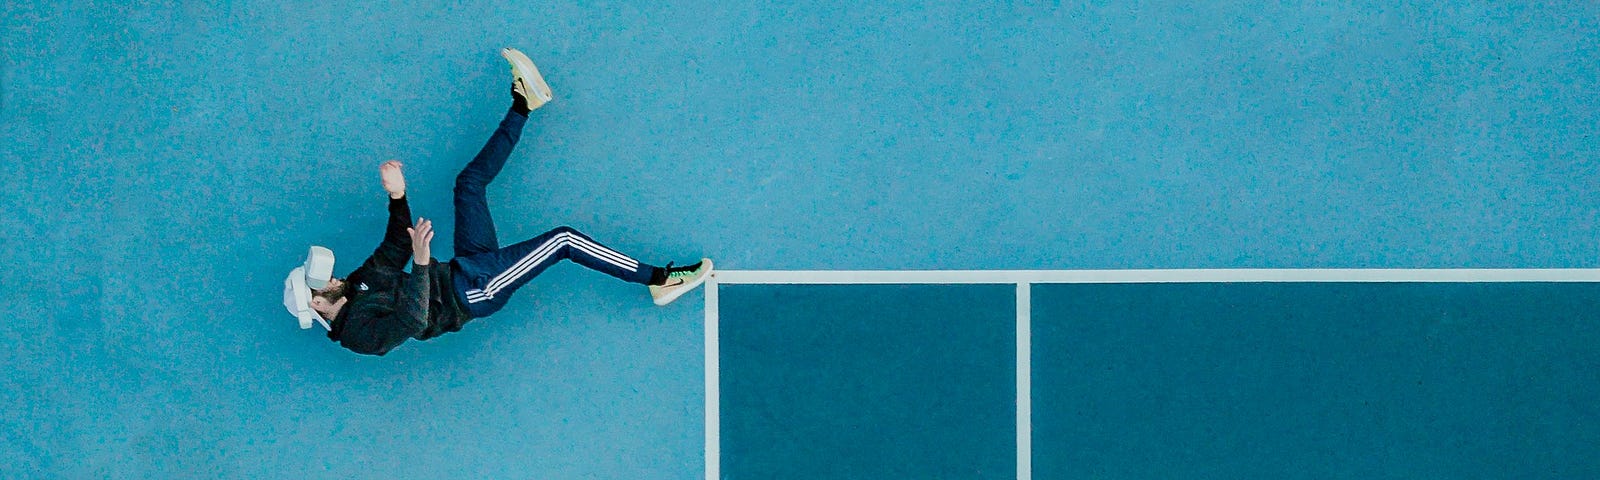 An illusion of a person falling as they lie on their side at the edge of a tennis court.